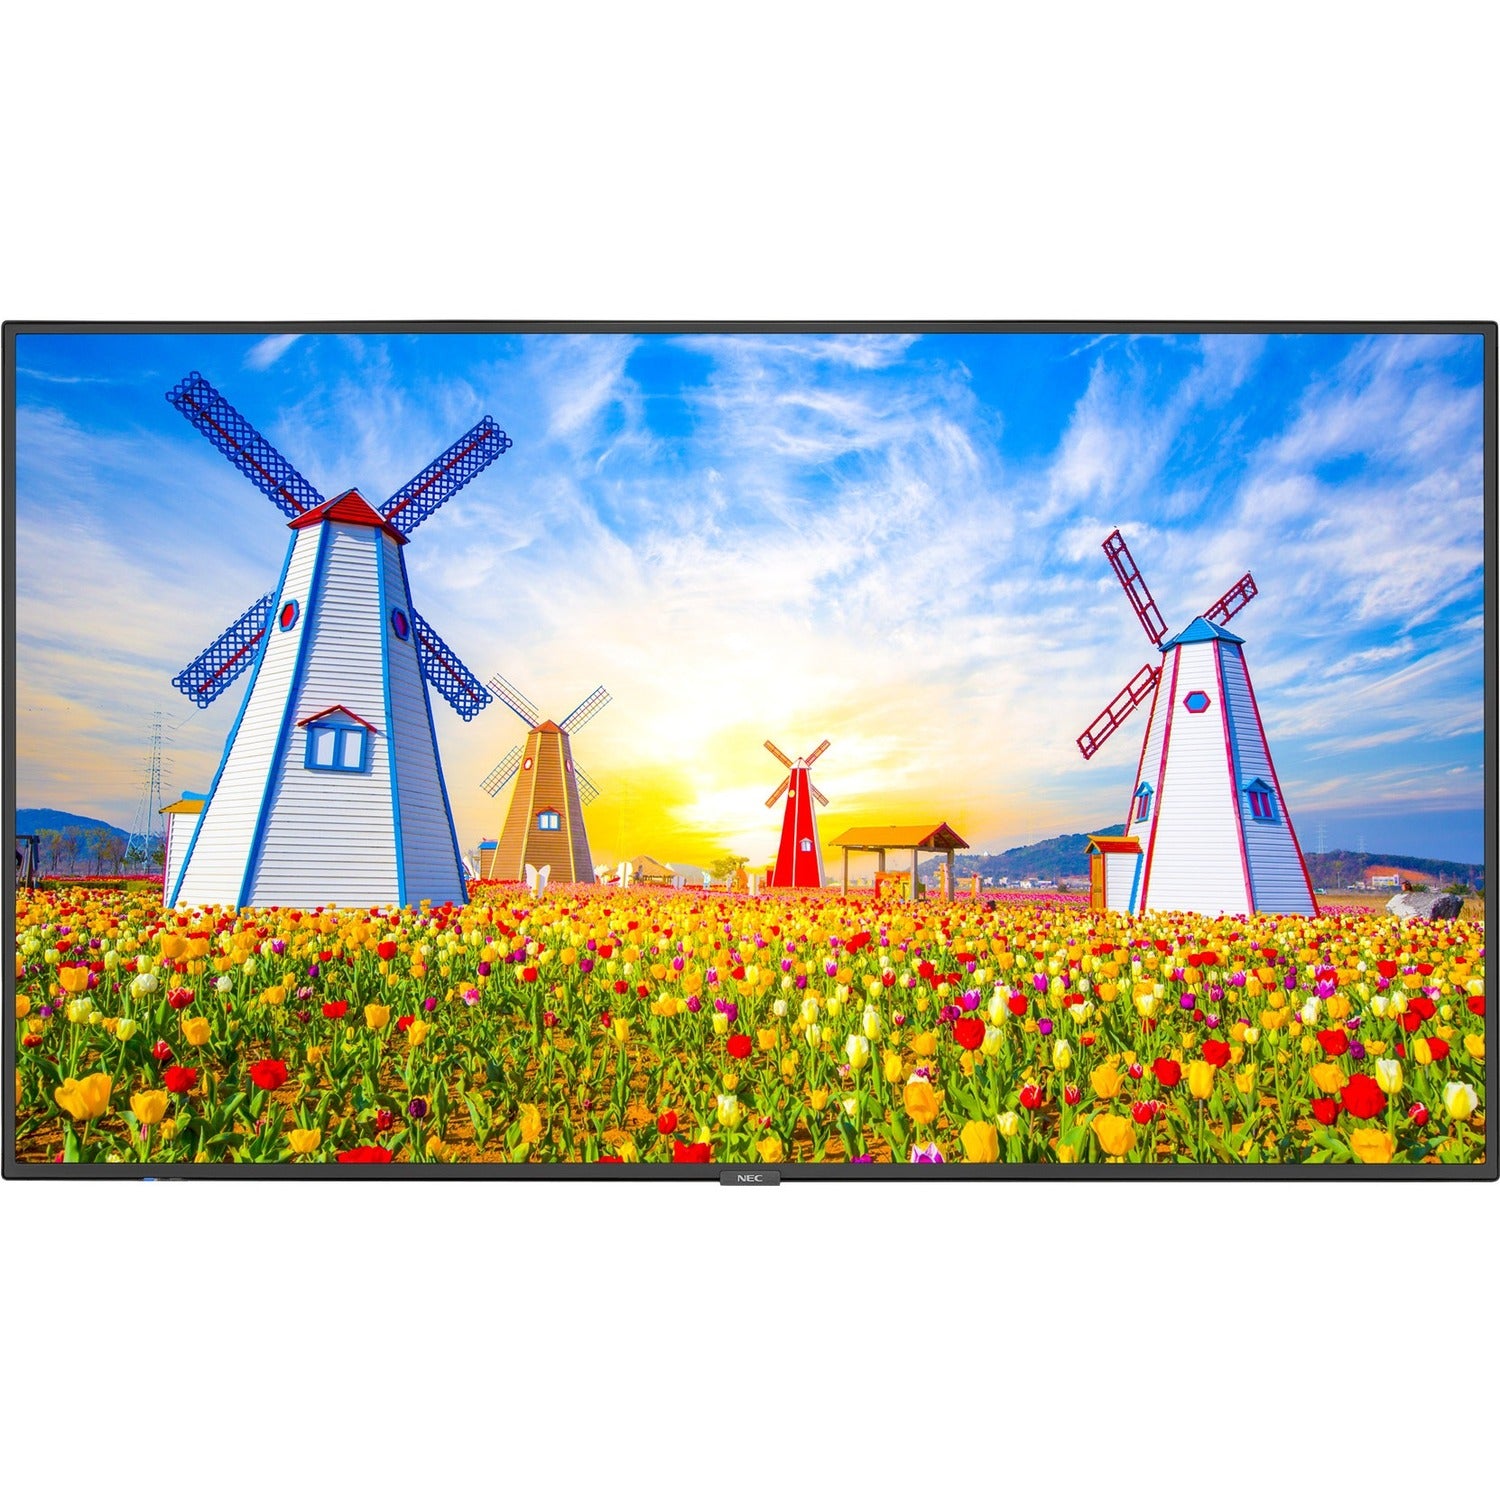 NEC Display 65" Ultra High Definition Professional Display with Built-In Intel PC - M651-PC5